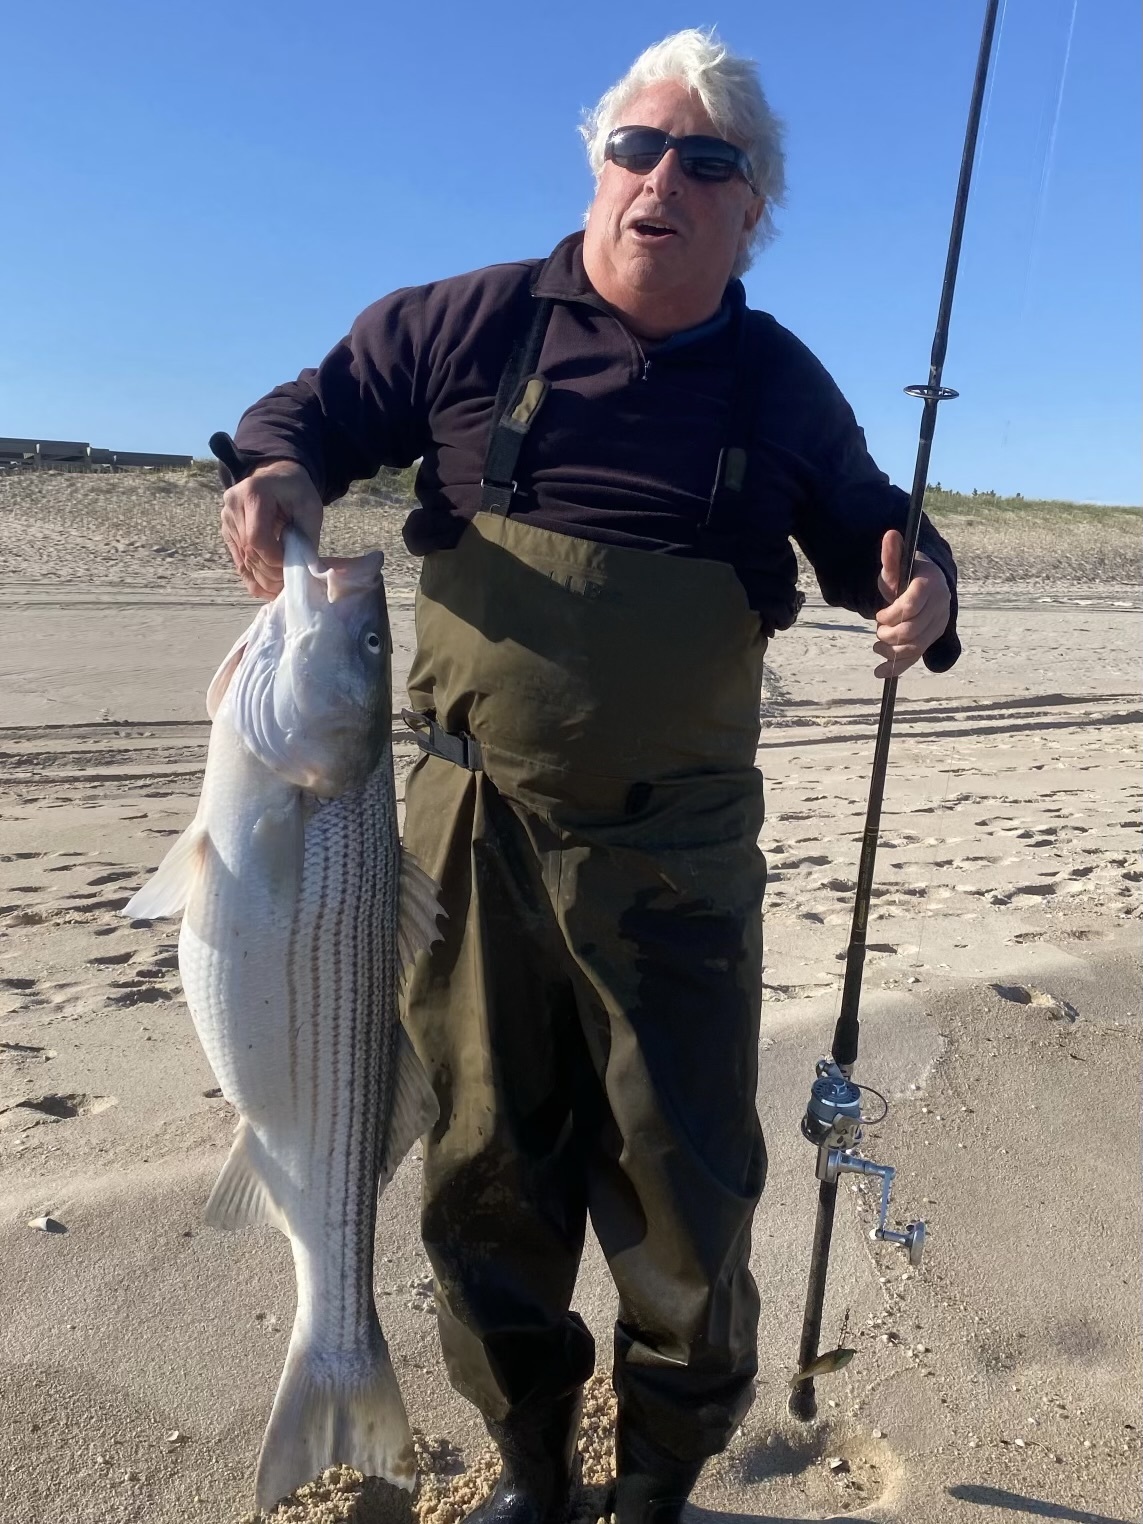 Adam Flax caught and released this fat striped bass from the beach in Bridgehampton last week.